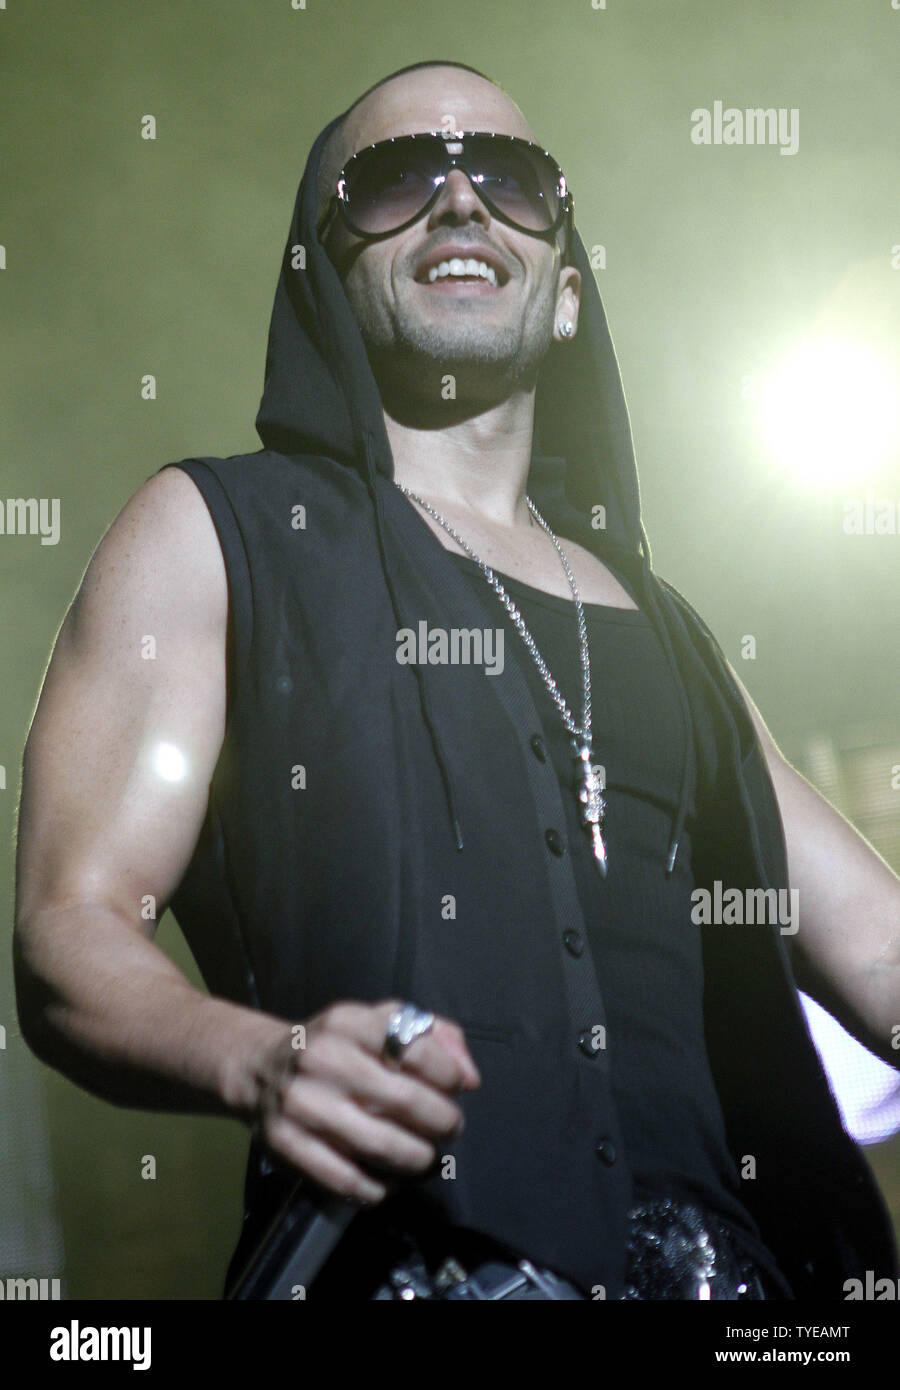 Yandel with the latin reggaeton group Wisin Y Yandel performs in concert at the American Airlines Arena in Miami on June 3, 2011.  UPI/Michael Bush Stock Photo